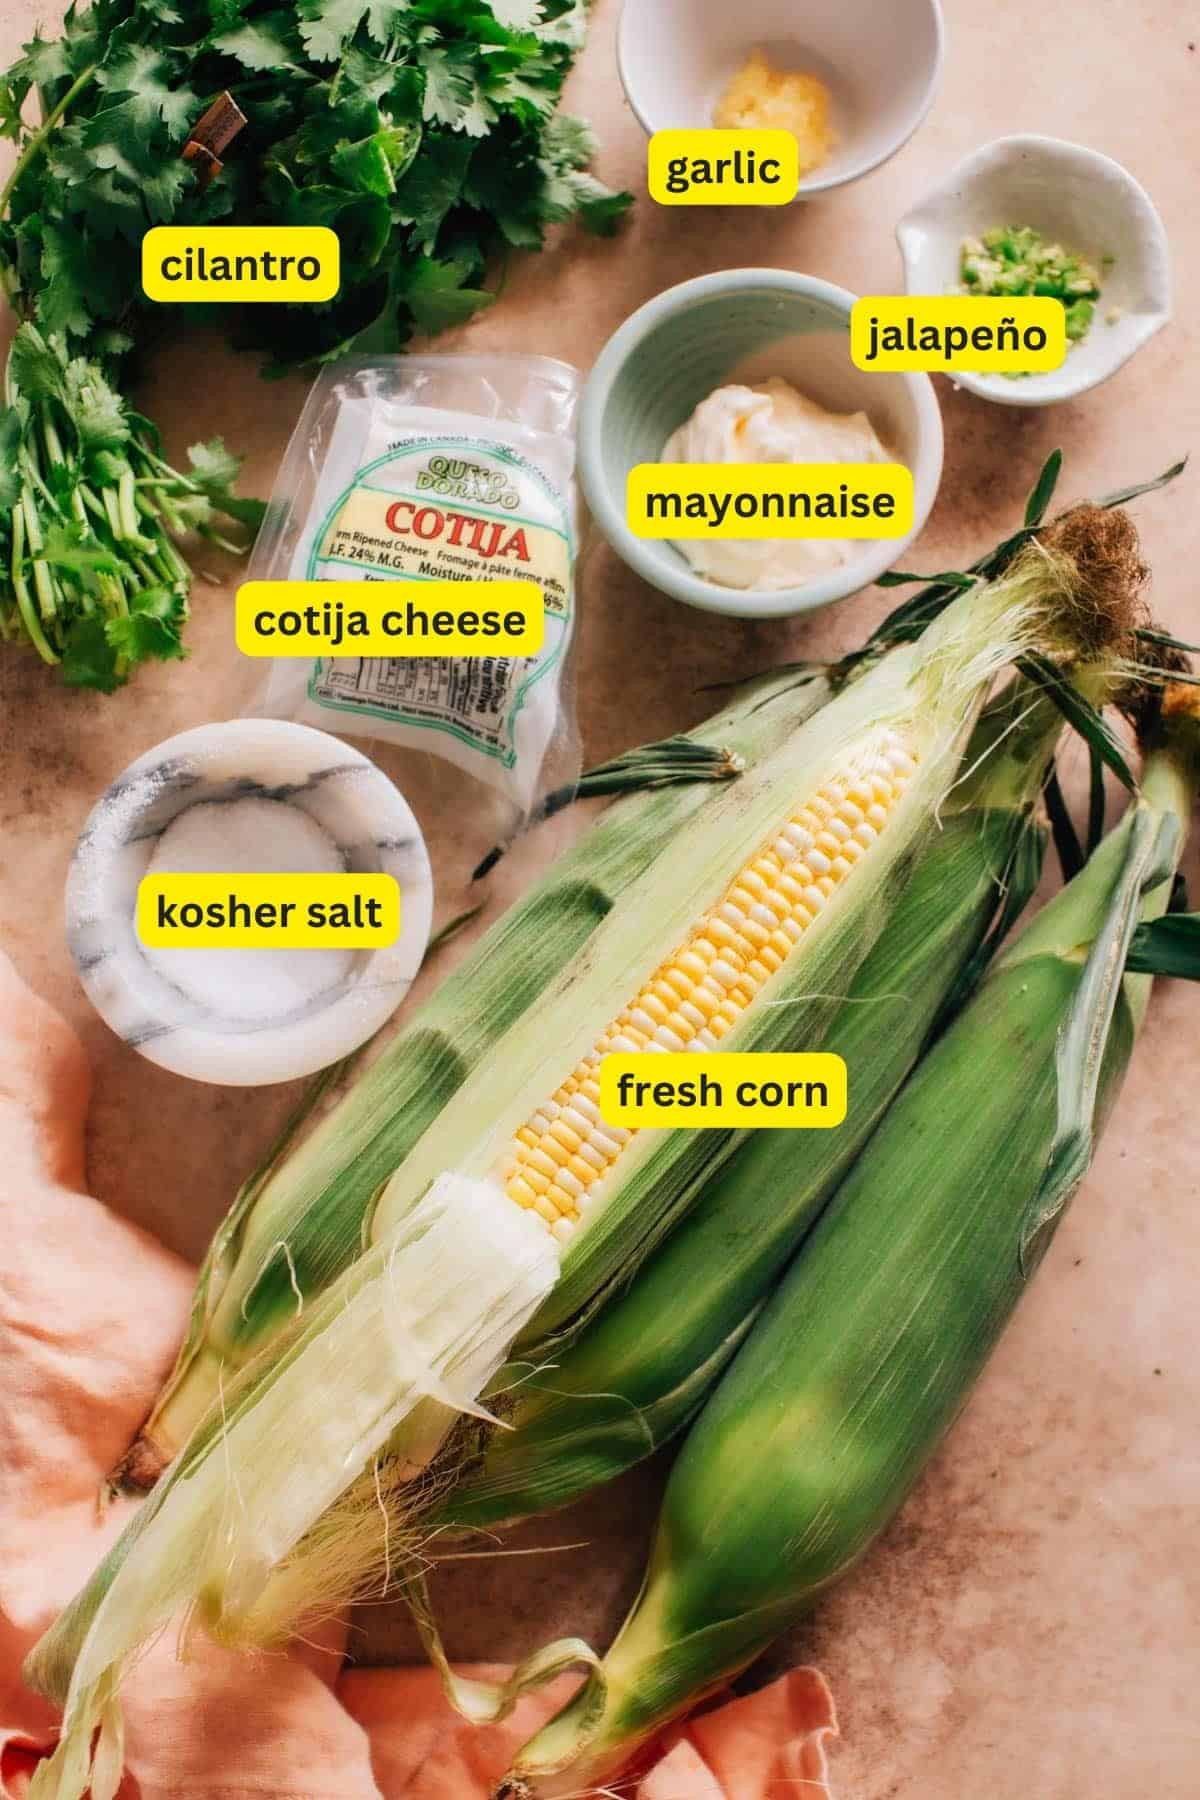 Ingredients for Mexican Street Corn Salad (Esquites) arranged on a kitchen countertop, including cilantro, garlic, jalapeno, Cotija cheese, kosher salt, mayonnaise, and fresh corn.